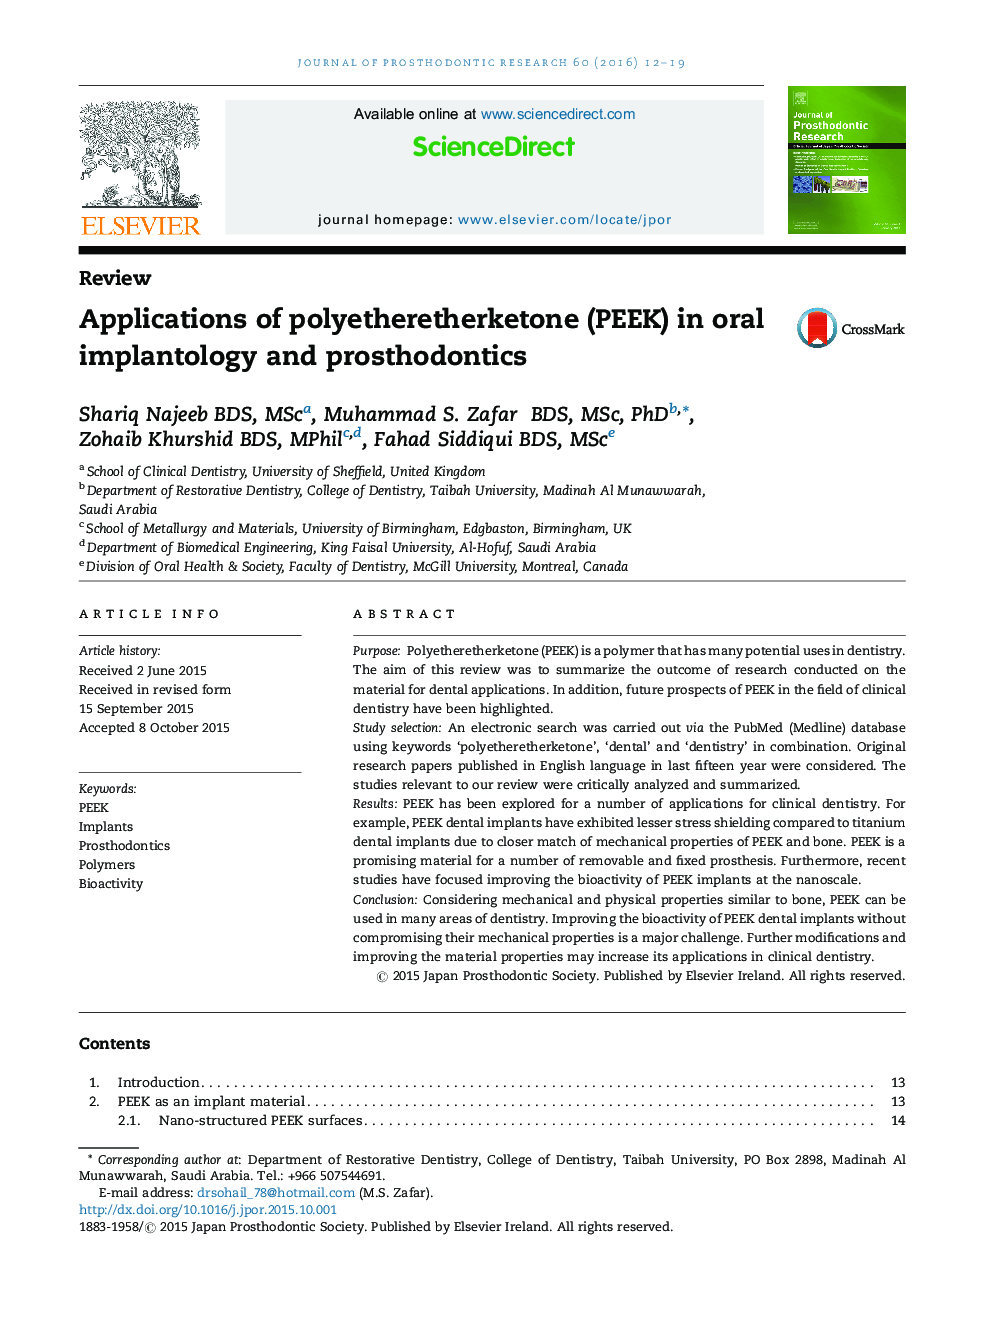 Applications of polyetheretherketone (PEEK) in oral implantology and prosthodontics